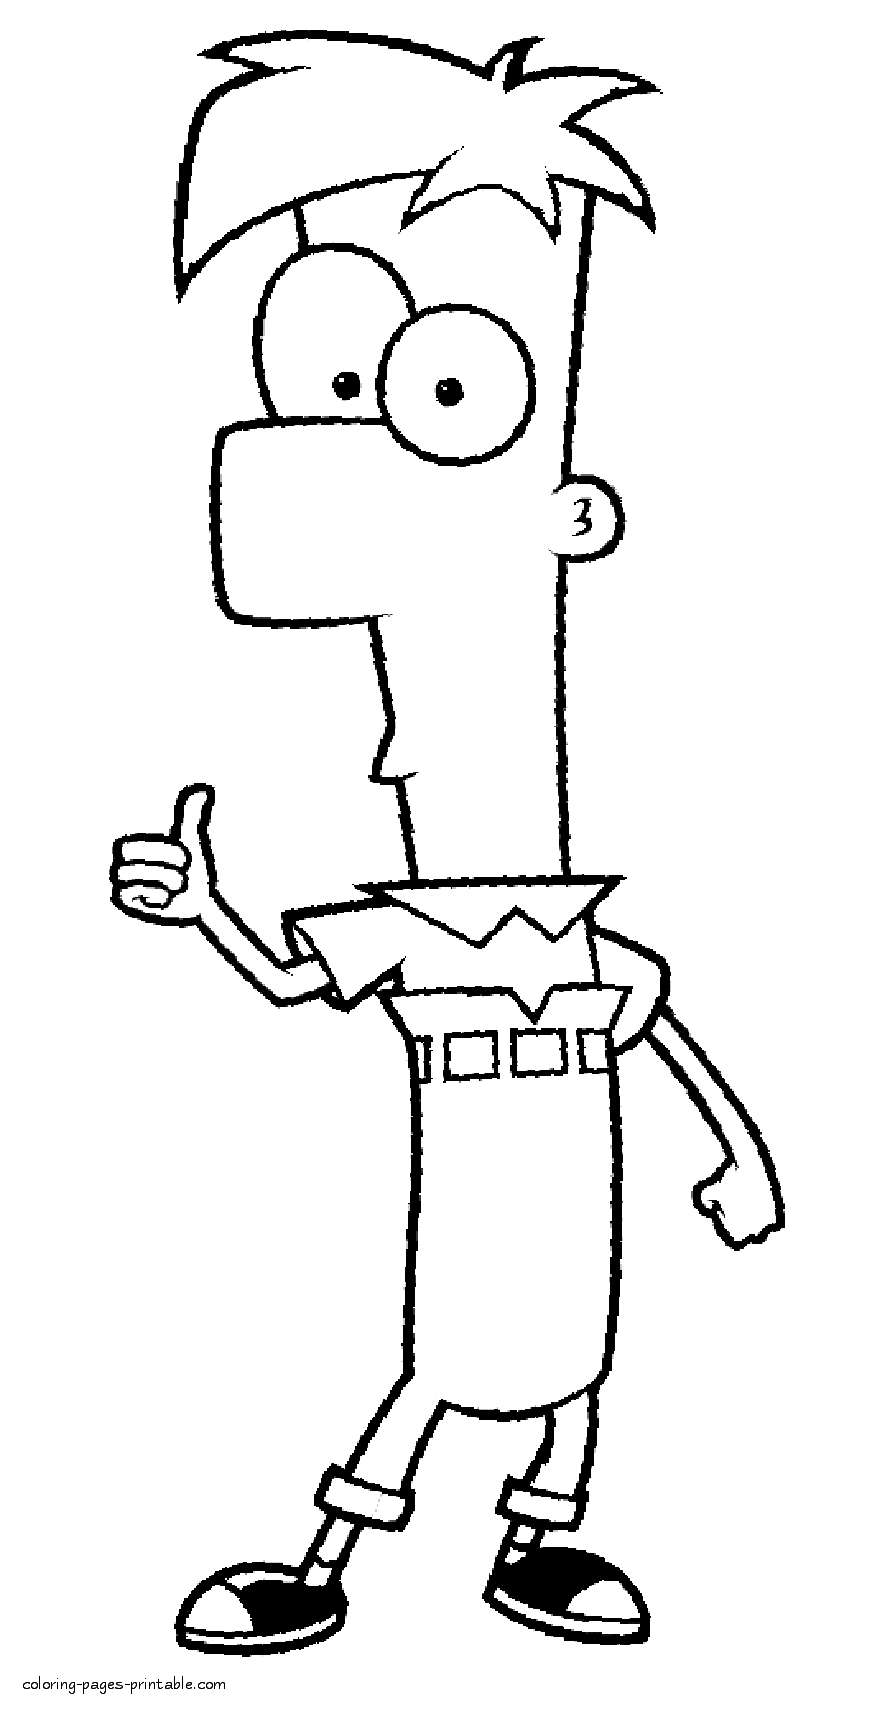 Phineas and Ferb coloring pages || COLORING-PAGES-PRINTABLE.COM